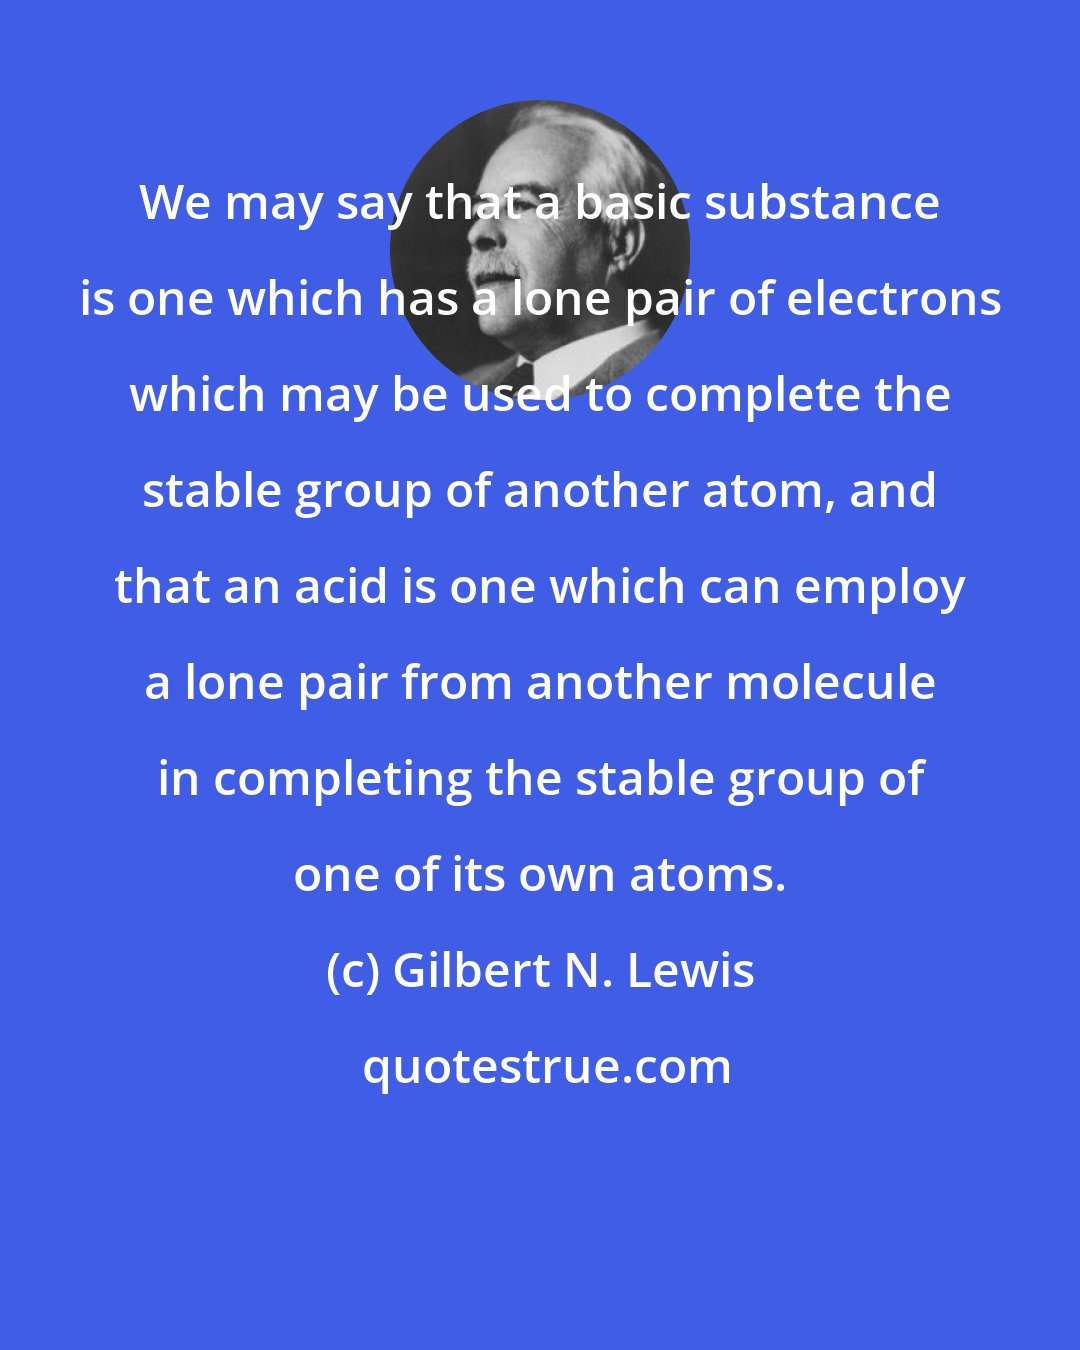 Gilbert N. Lewis: We may say that a basic substance is one which has a lone pair of electrons which may be used to complete the stable group of another atom, and that an acid is one which can employ a lone pair from another molecule in completing the stable group of one of its own atoms.